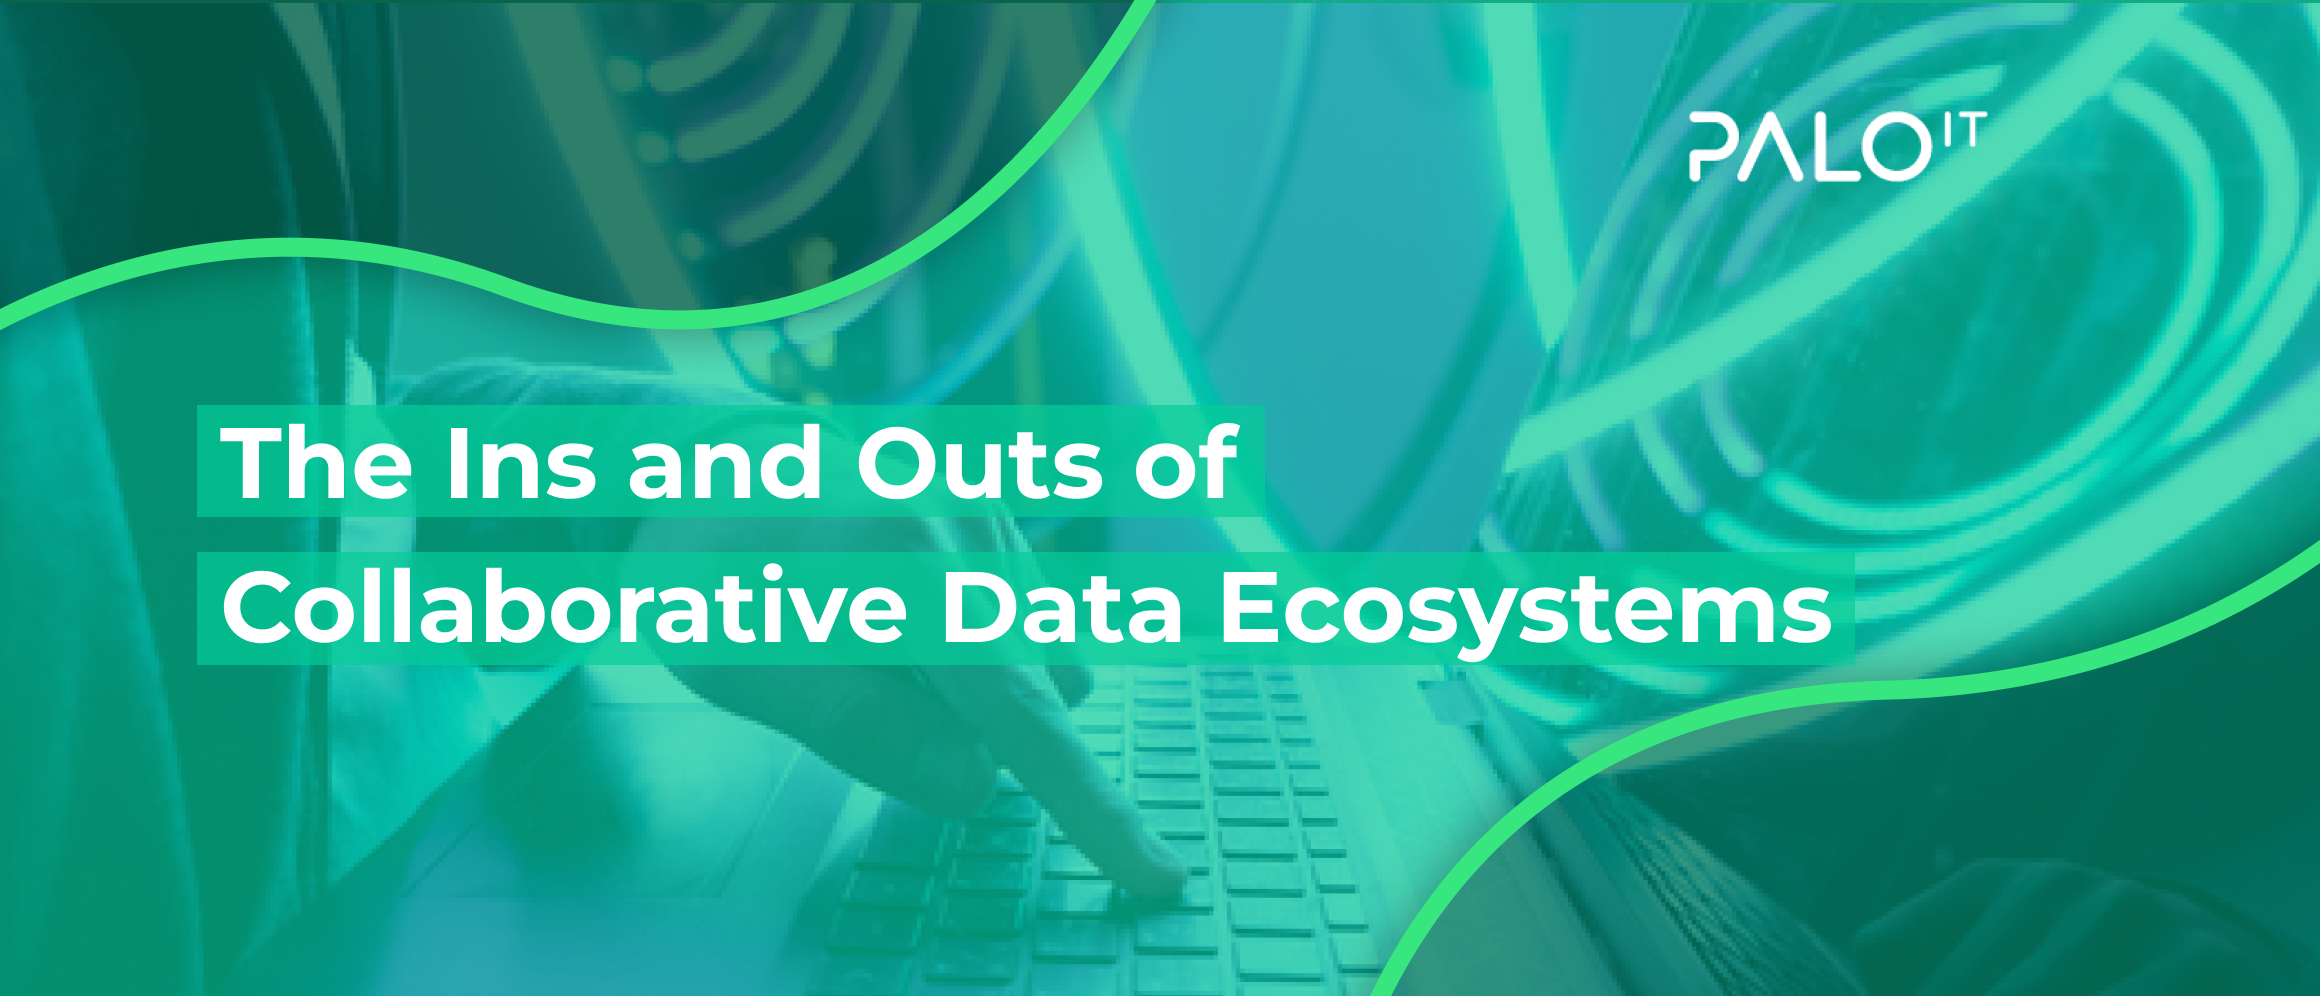 The Ins and Outs of Collaborative Data Ecosystems